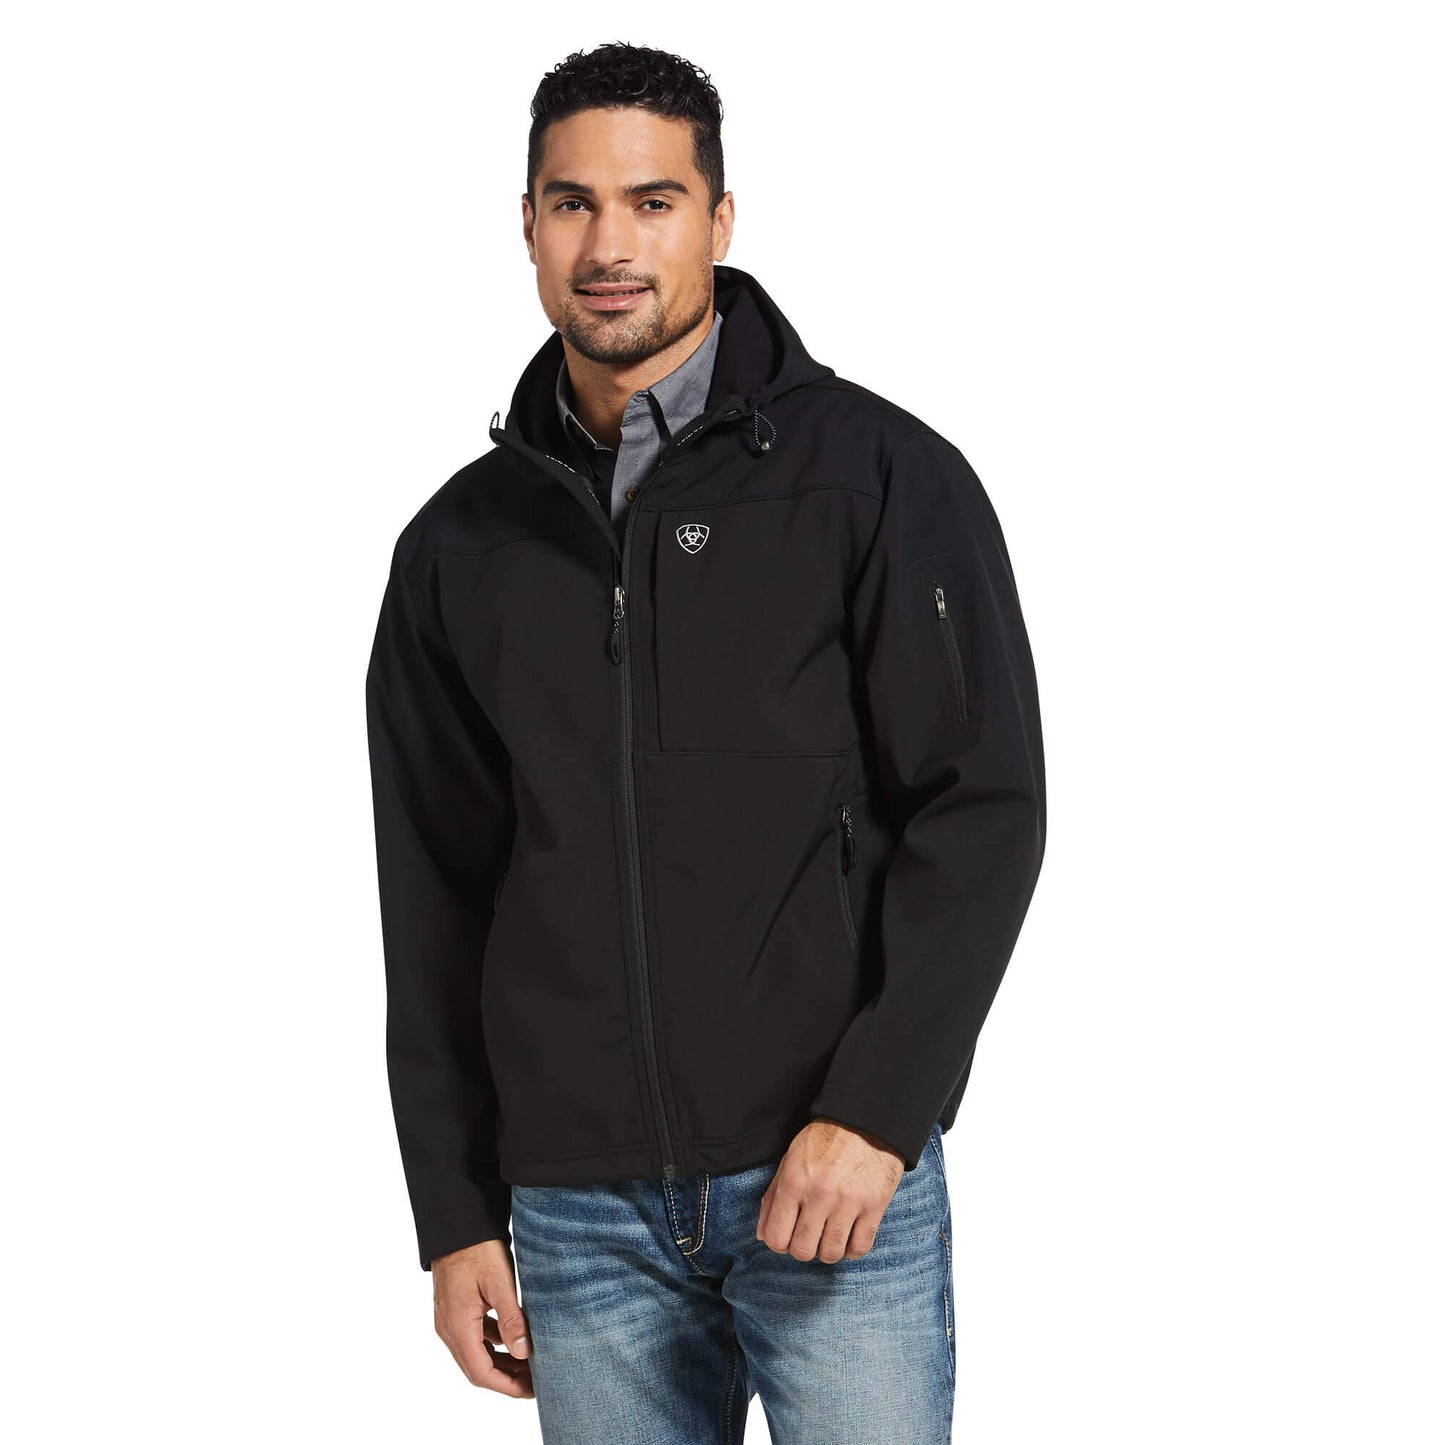 Vernon Hooded Softshell Water Resistant Jacket